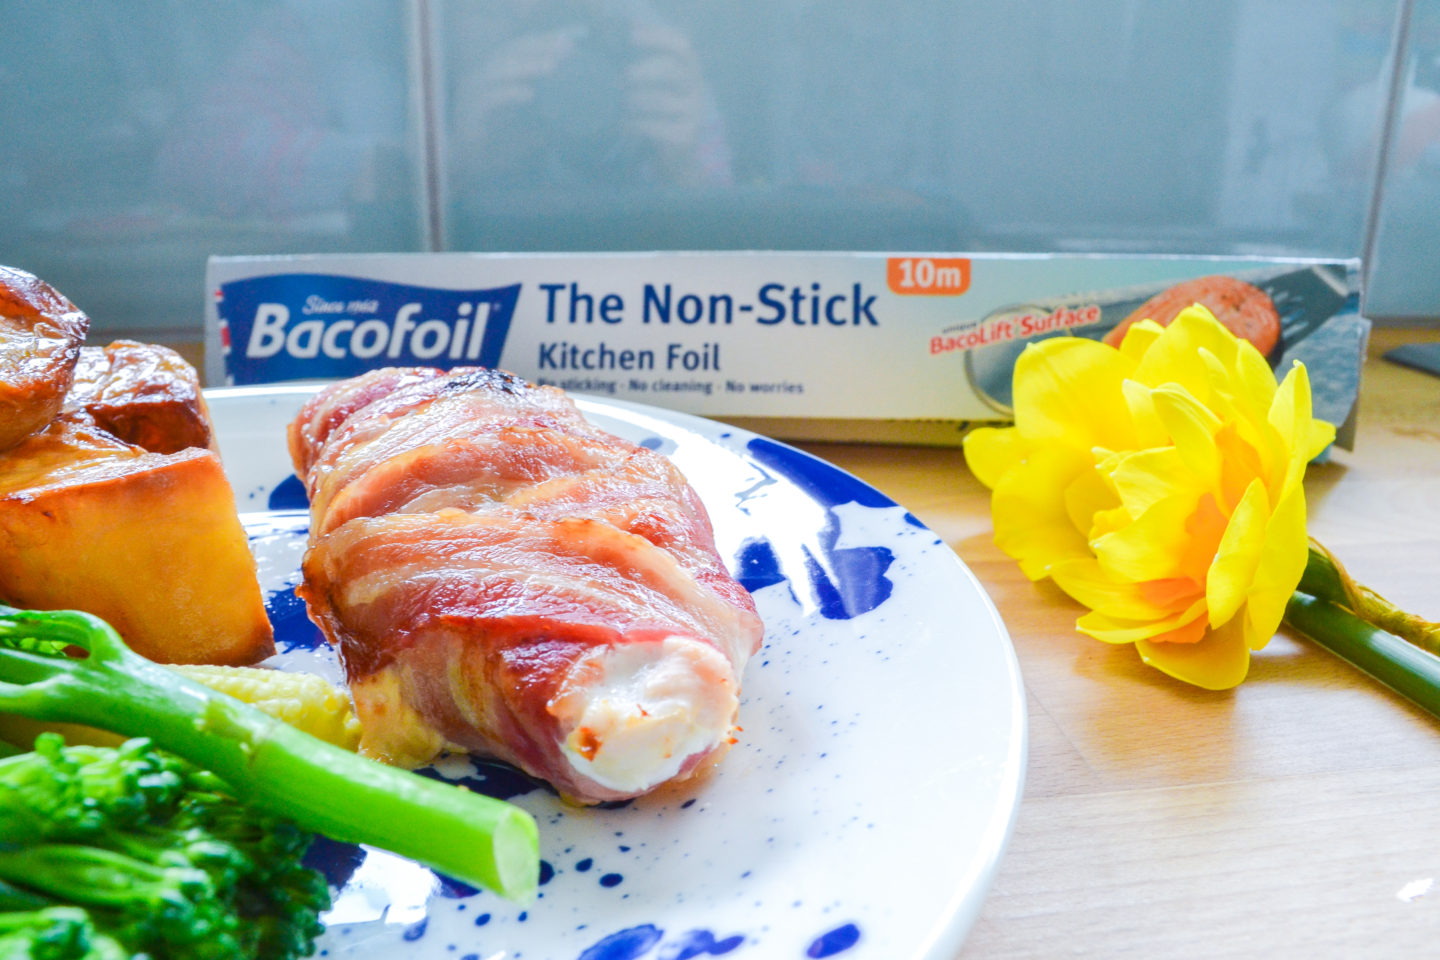 Bacofoil® The Non-Stick Kitchen Foil does it work well?